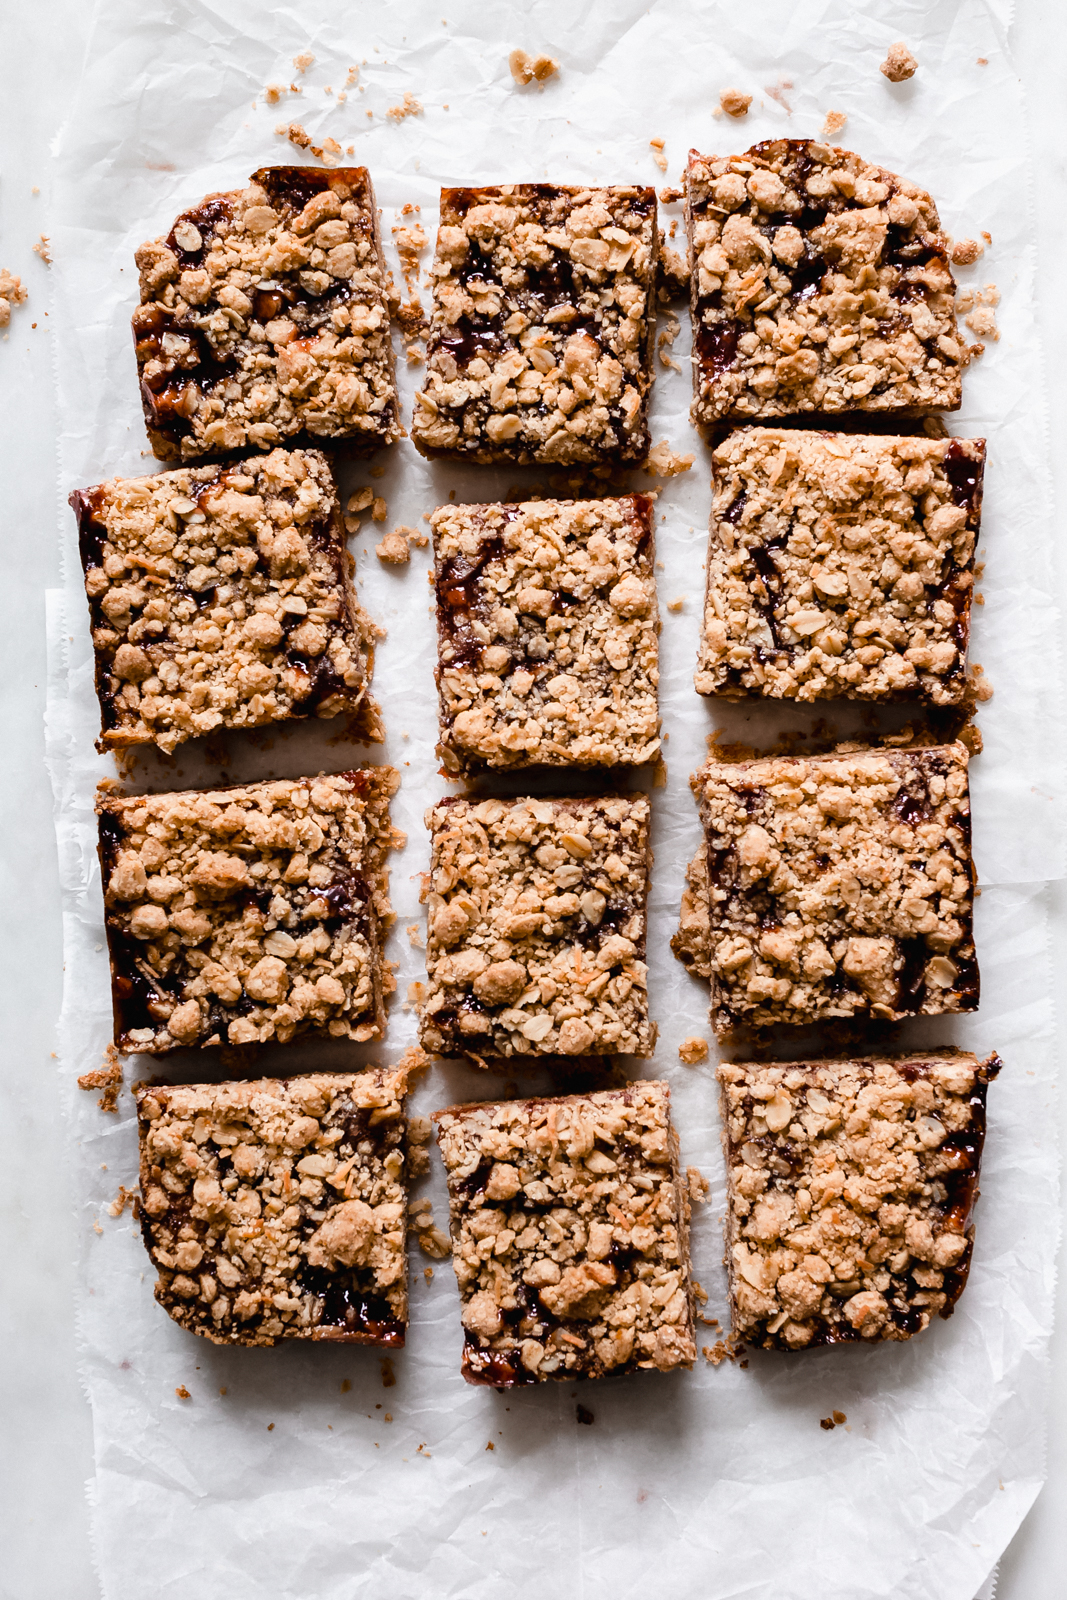 12 pieces of jelly oat bars on crumpled wax paper with scattered crumb topping